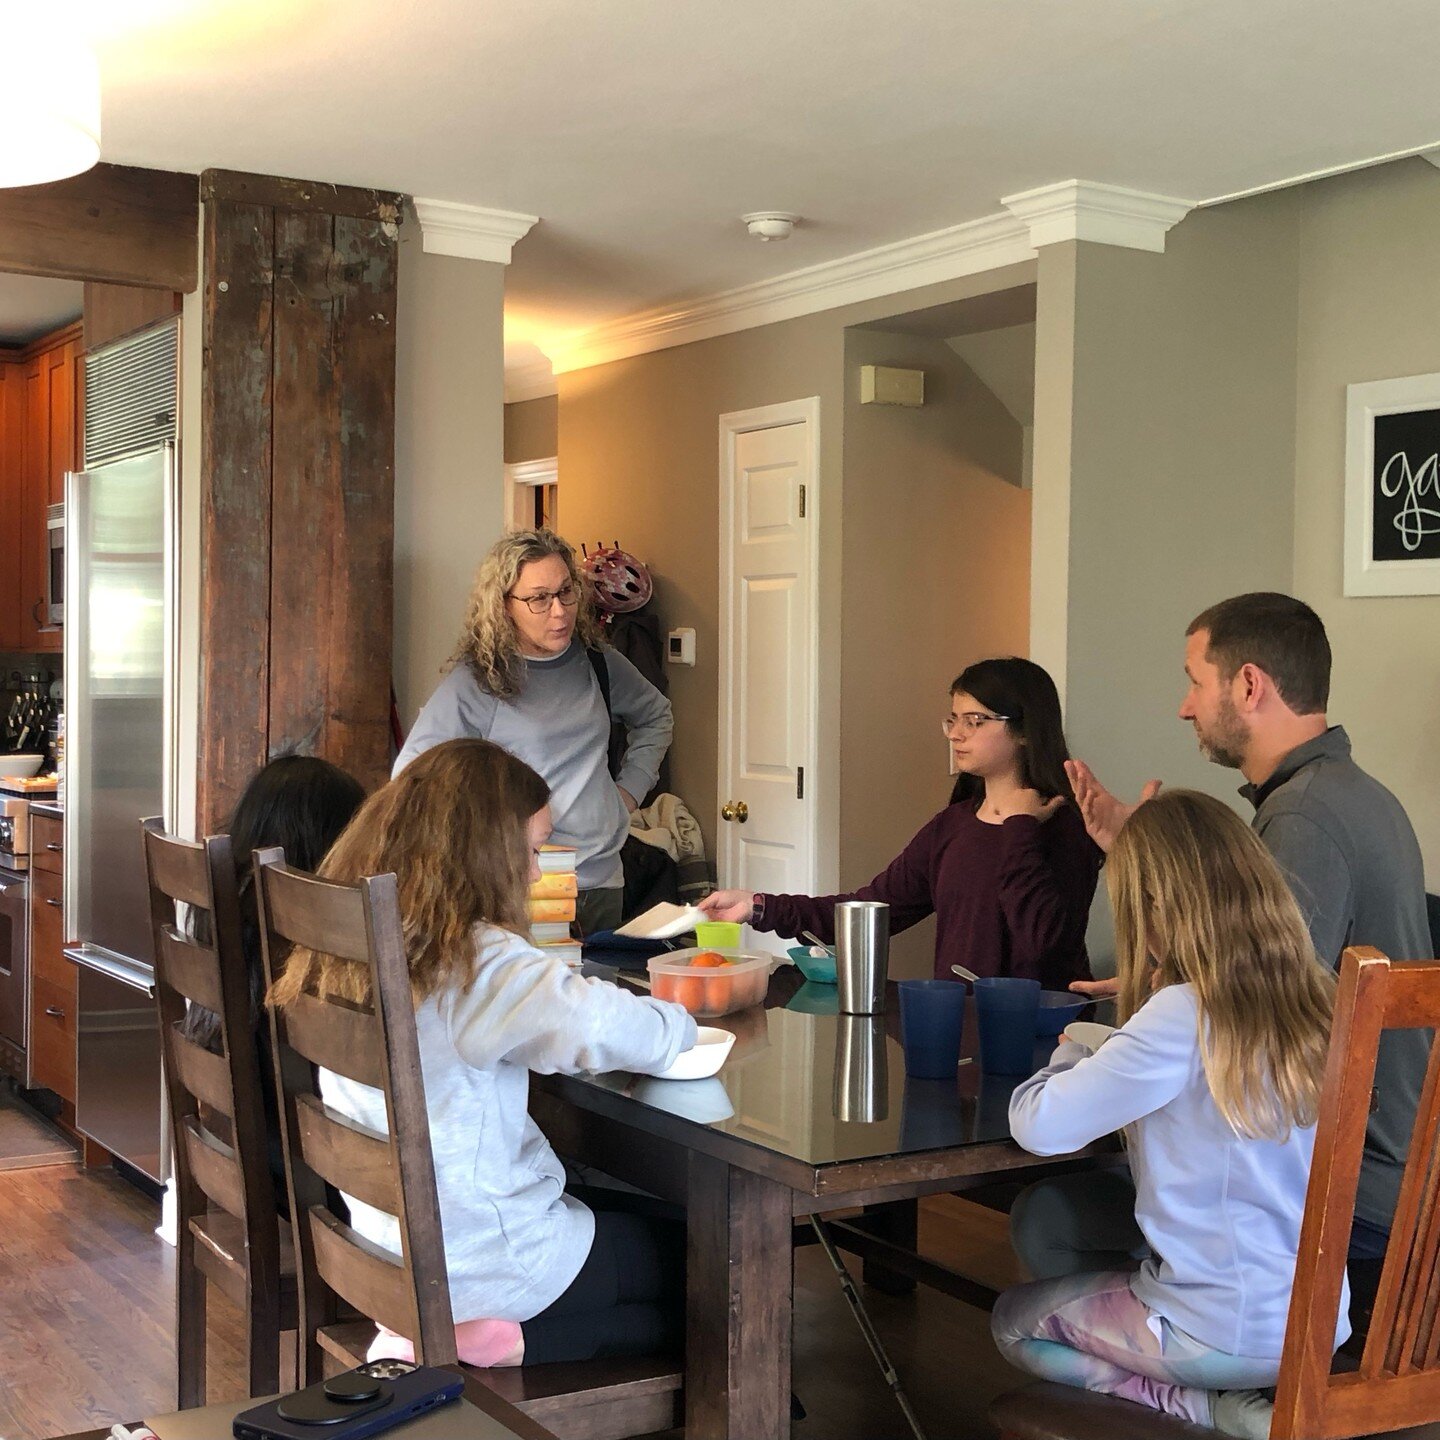 We had a special treat yesterday!

During our weekly Wednesday bible study with some of our kids, Jill stopped by on her way to share her faith with people who are imprisoned and shared why she does what she does with people who are incarcerated.

We